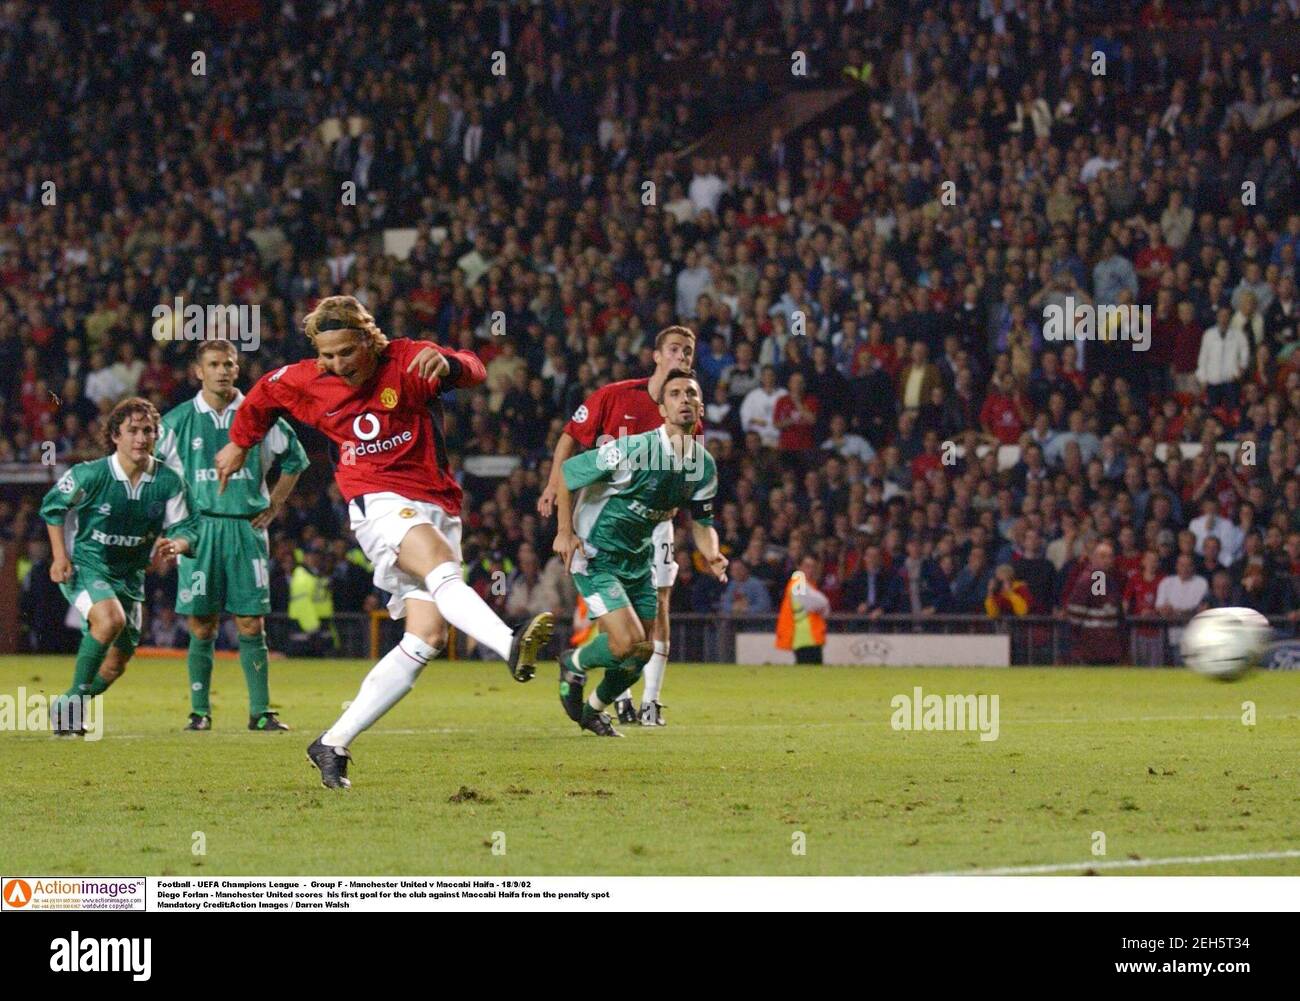 Football - UEFA Champions League - Group F - Manchester United v Maccabi  Haifa - 18/9/02 Diego Forlan - Manchester United scores his first goal for  the club against Maccabi Haifa from